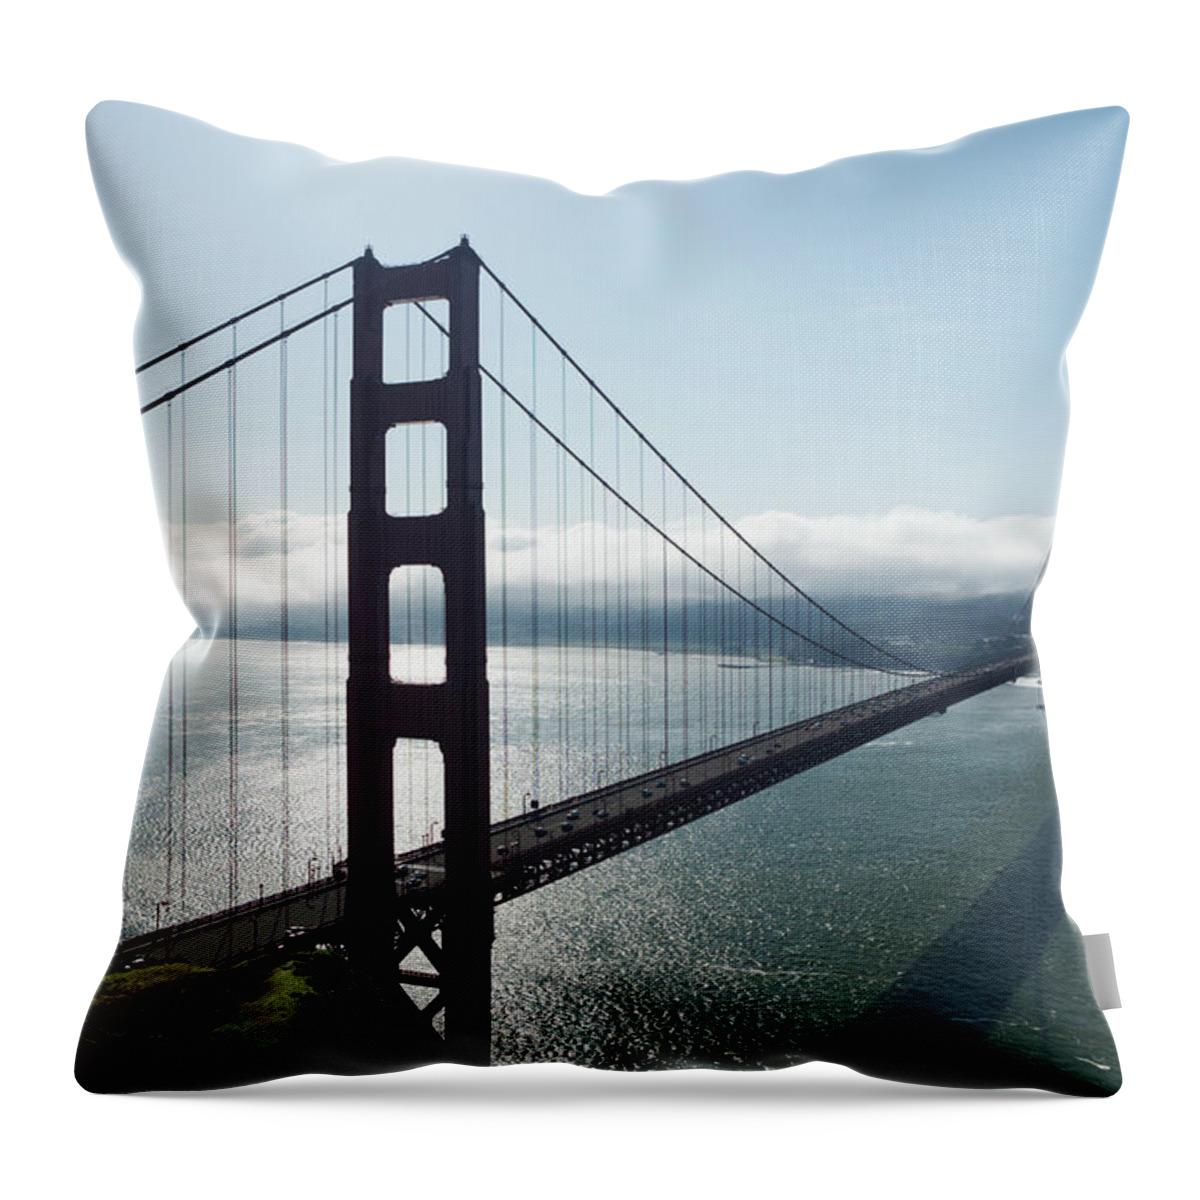 San Francisco Throw Pillow featuring the photograph Golden Gate Bridge, Backlit by Stephanhoerold